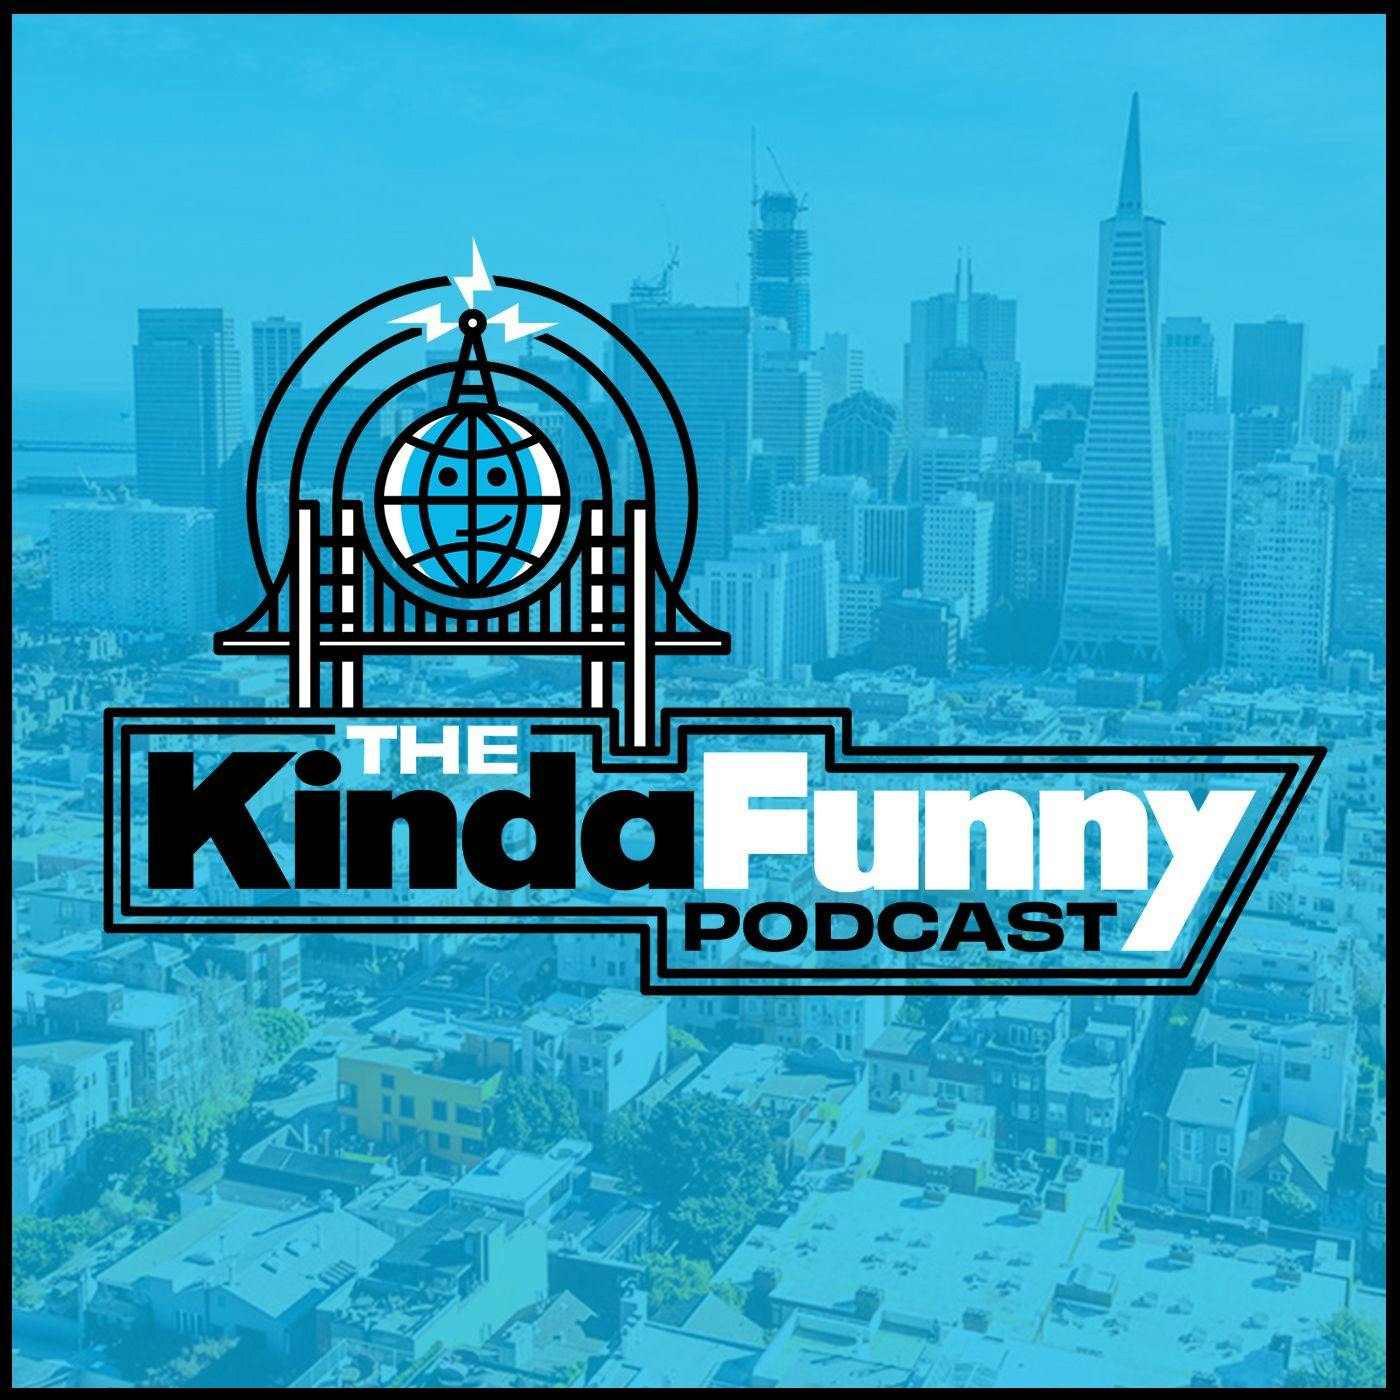 We Tell Greg Miller's Camping Stories (w/out Greg Miller) - Kinda Funny Podcast (Ep. 85)